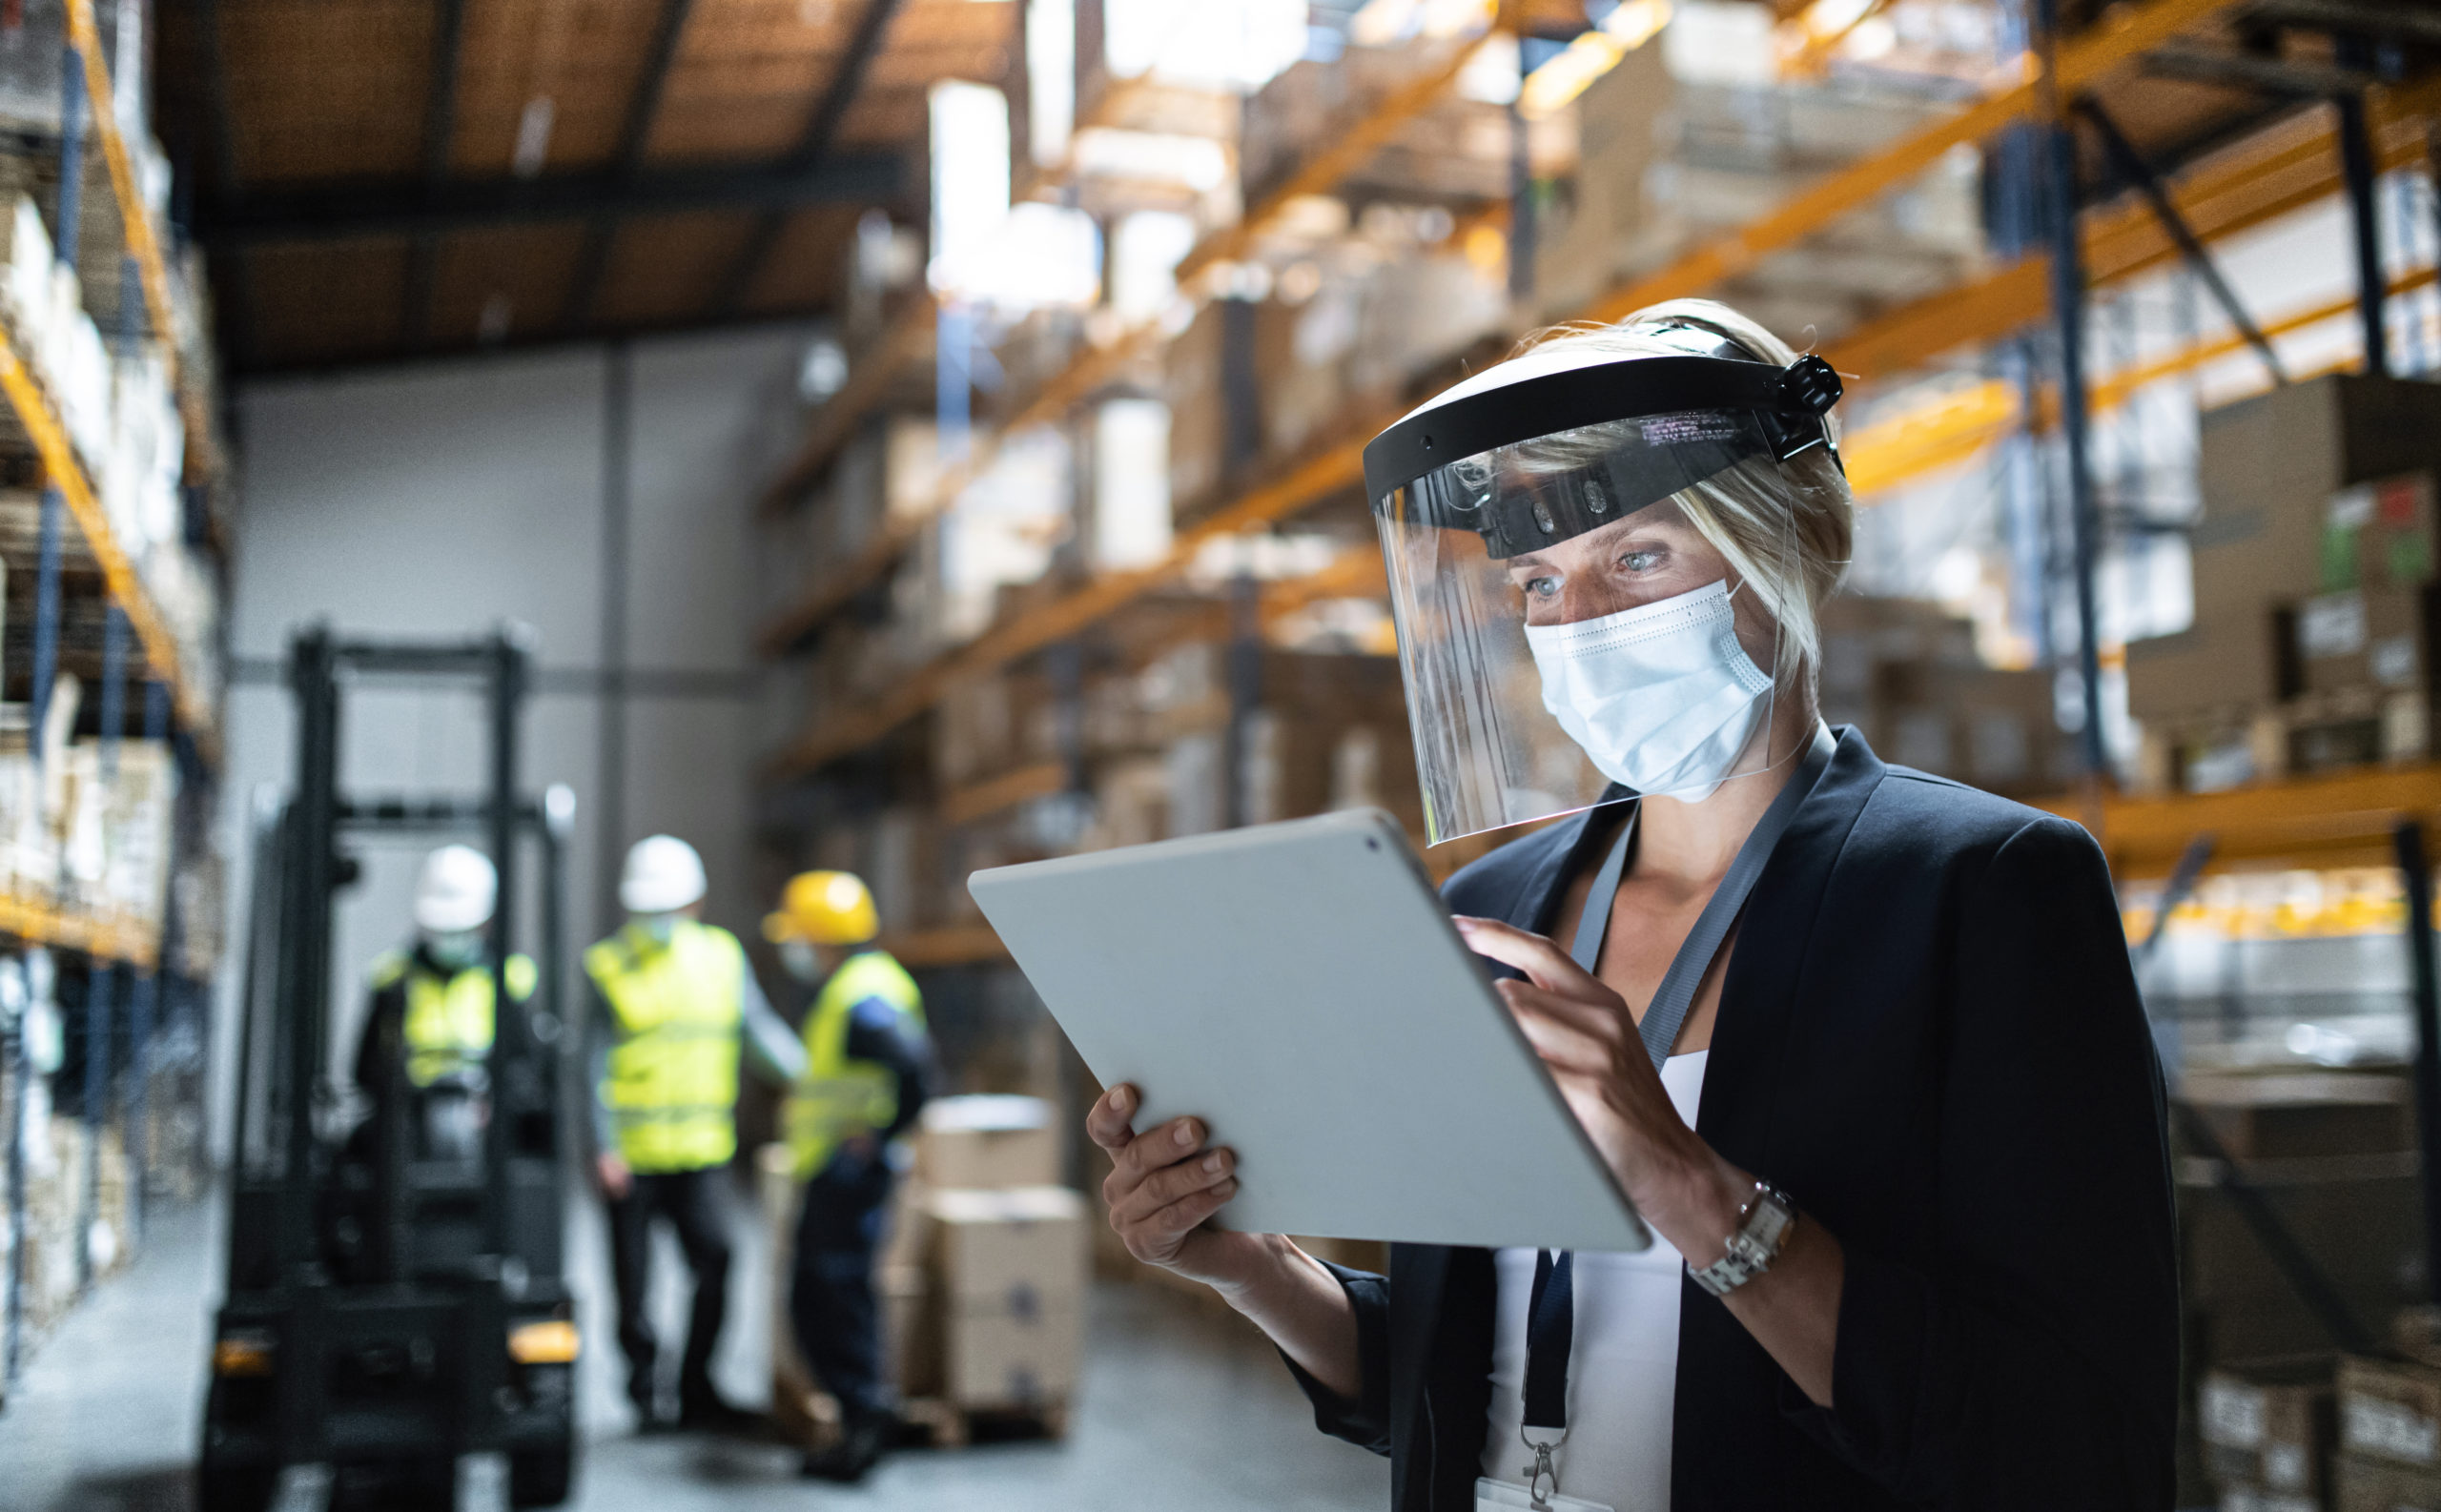 lead image for ppe inventory management article with subjects in the image wearing ppe as well